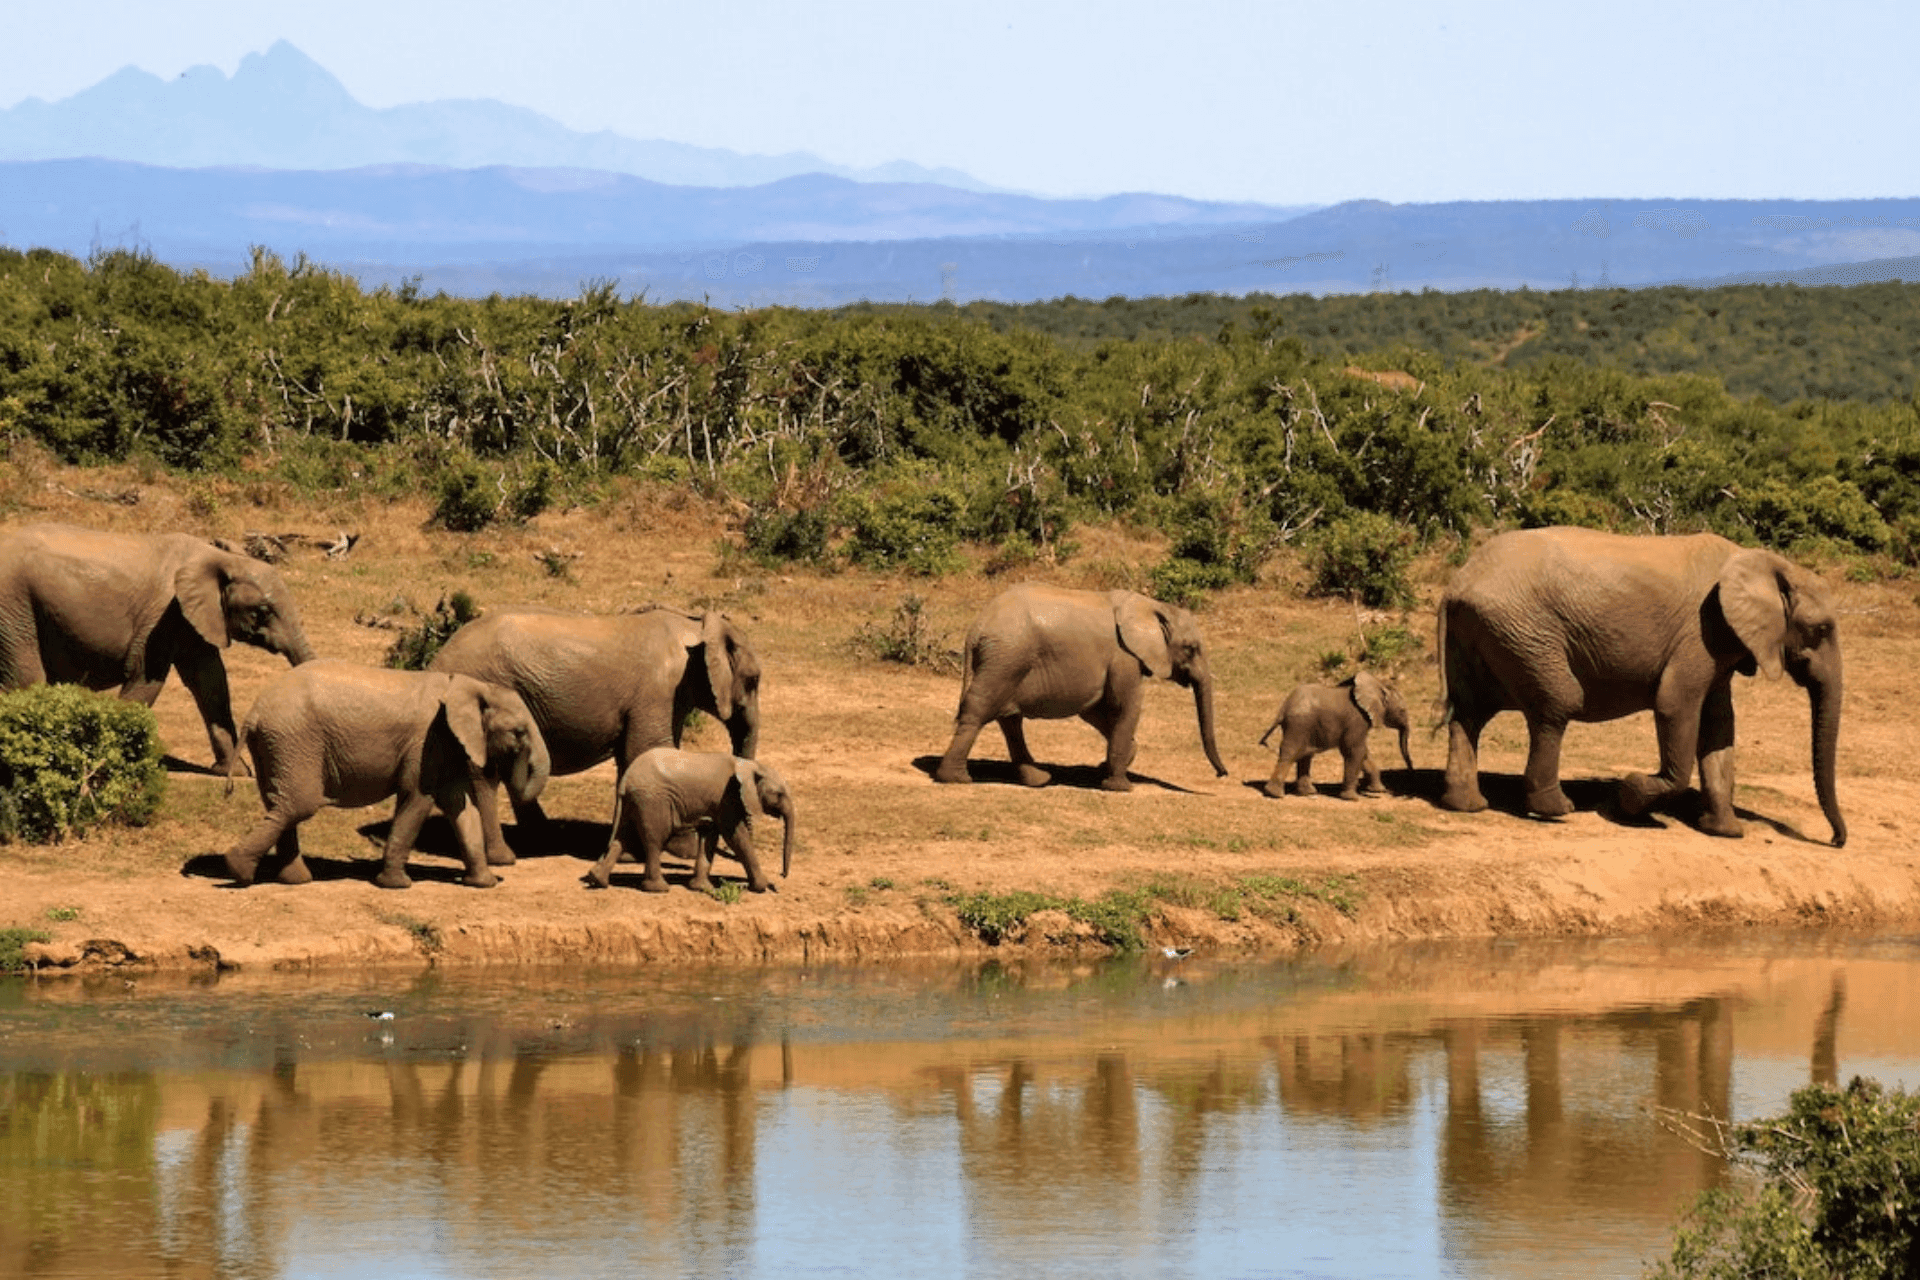 View of walking elephants in South Africa